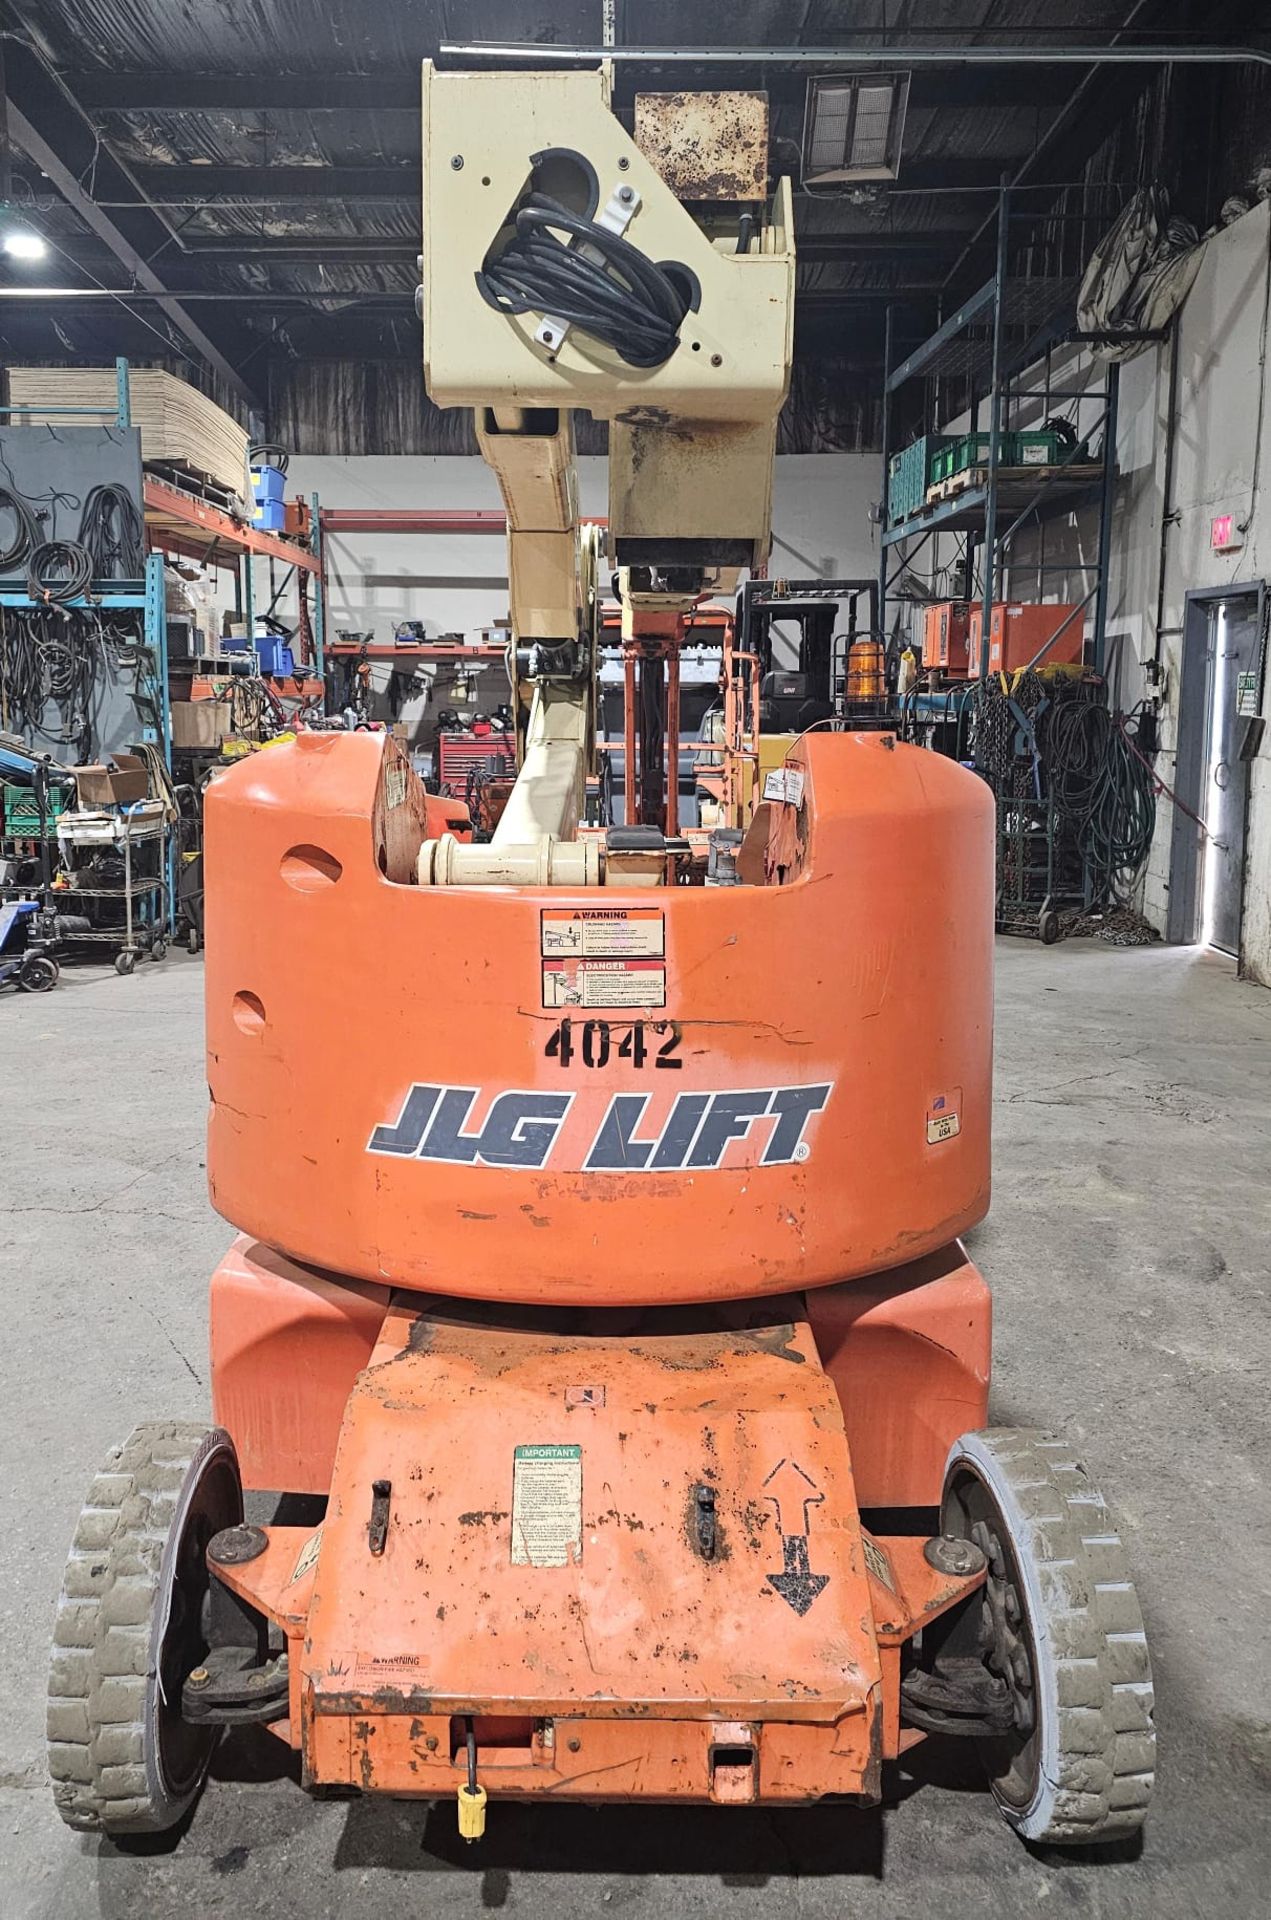 2006 JLG LIFT E400AJP Articulating Zoom Boom Lift - Narrow 500 lbs VERY LOW HOURS - 40ft lift height - Image 4 of 9